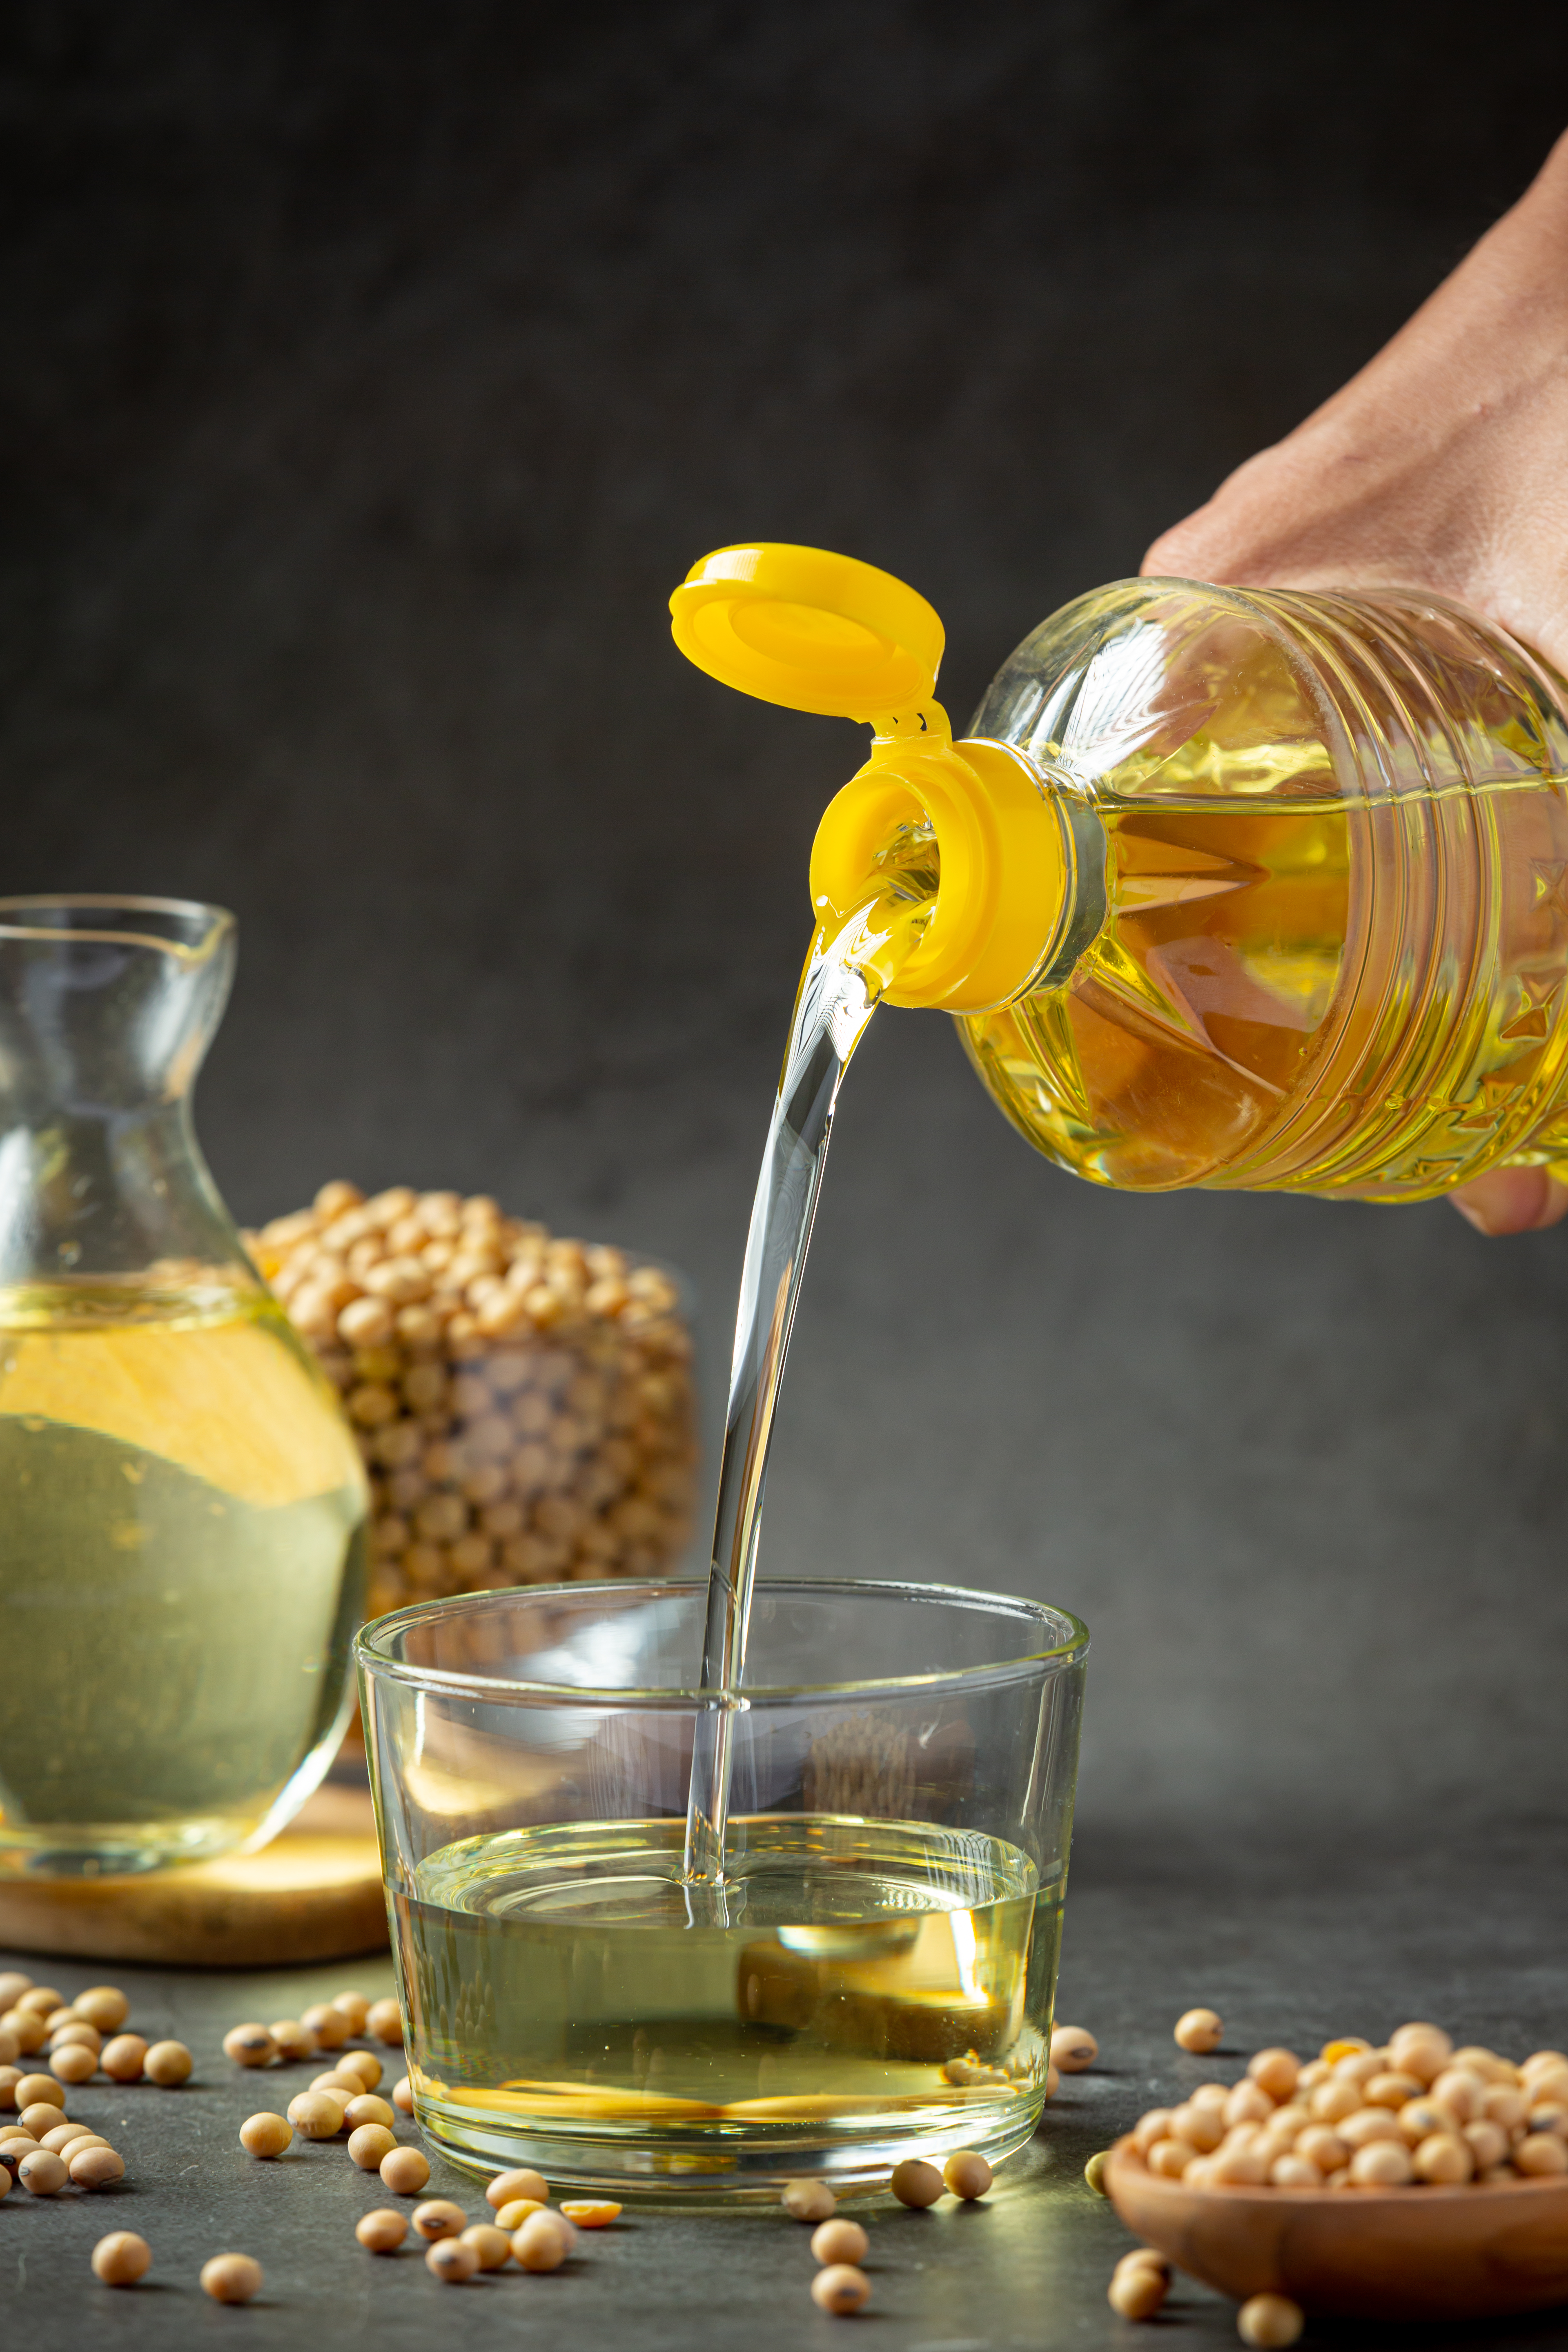 Oils and Fats: How Food Affects Health